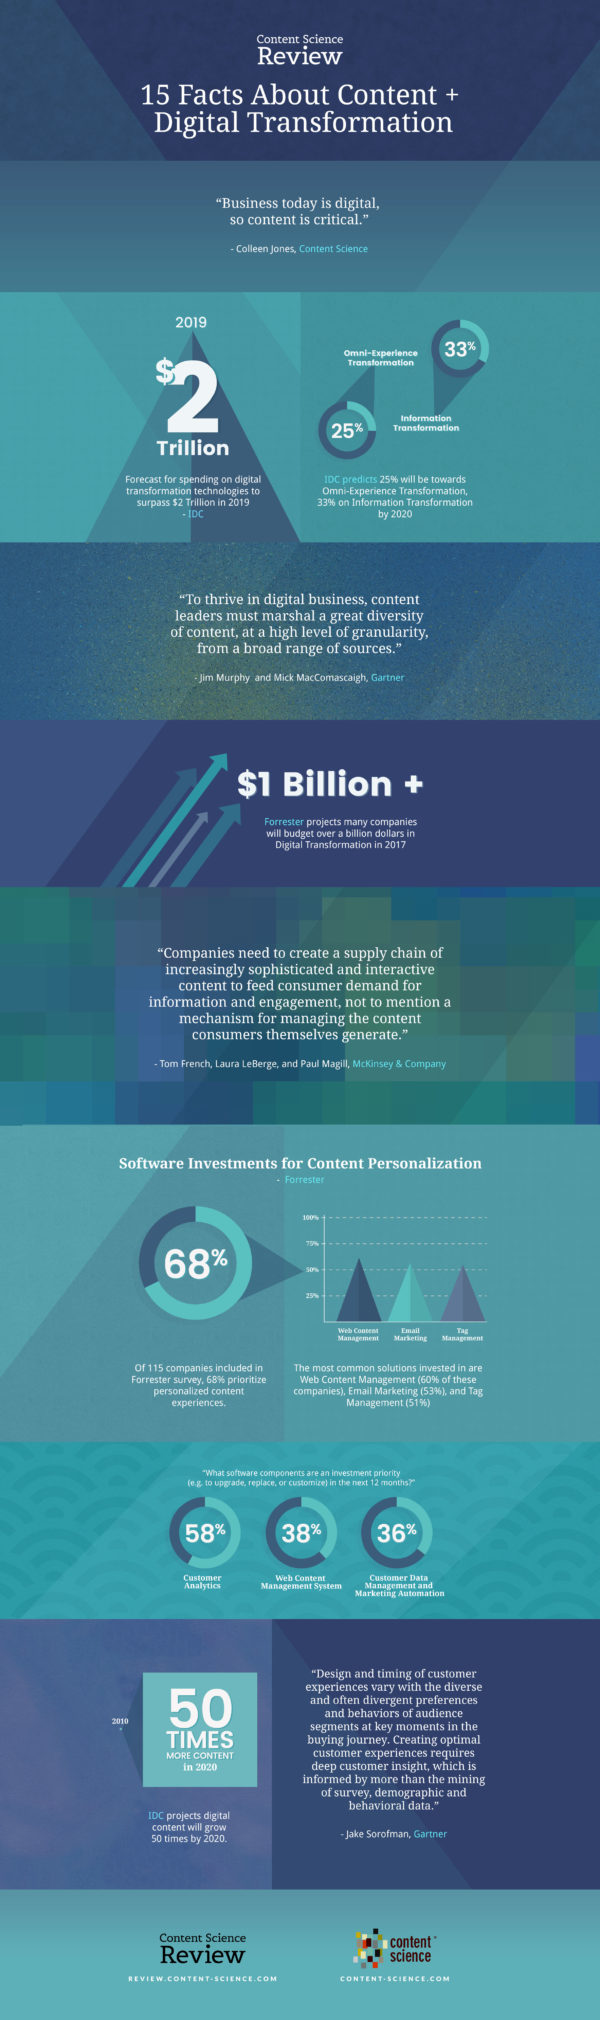 infographic about content and digital transformation